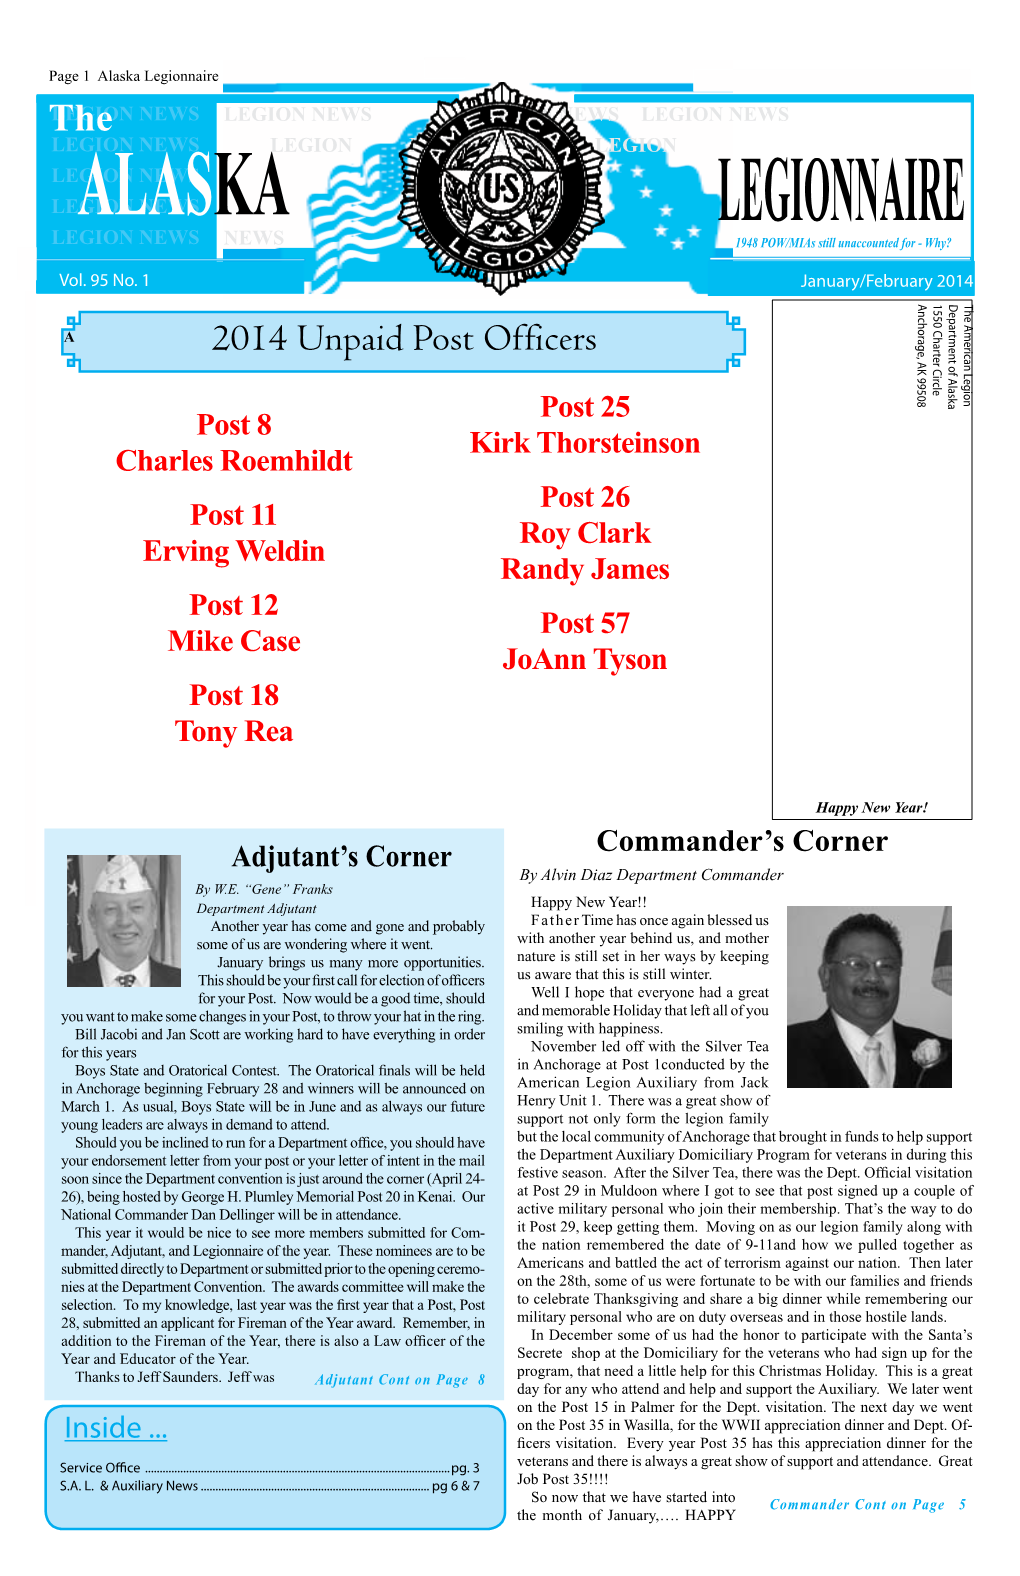 The 2014 Unpaid Post Officers